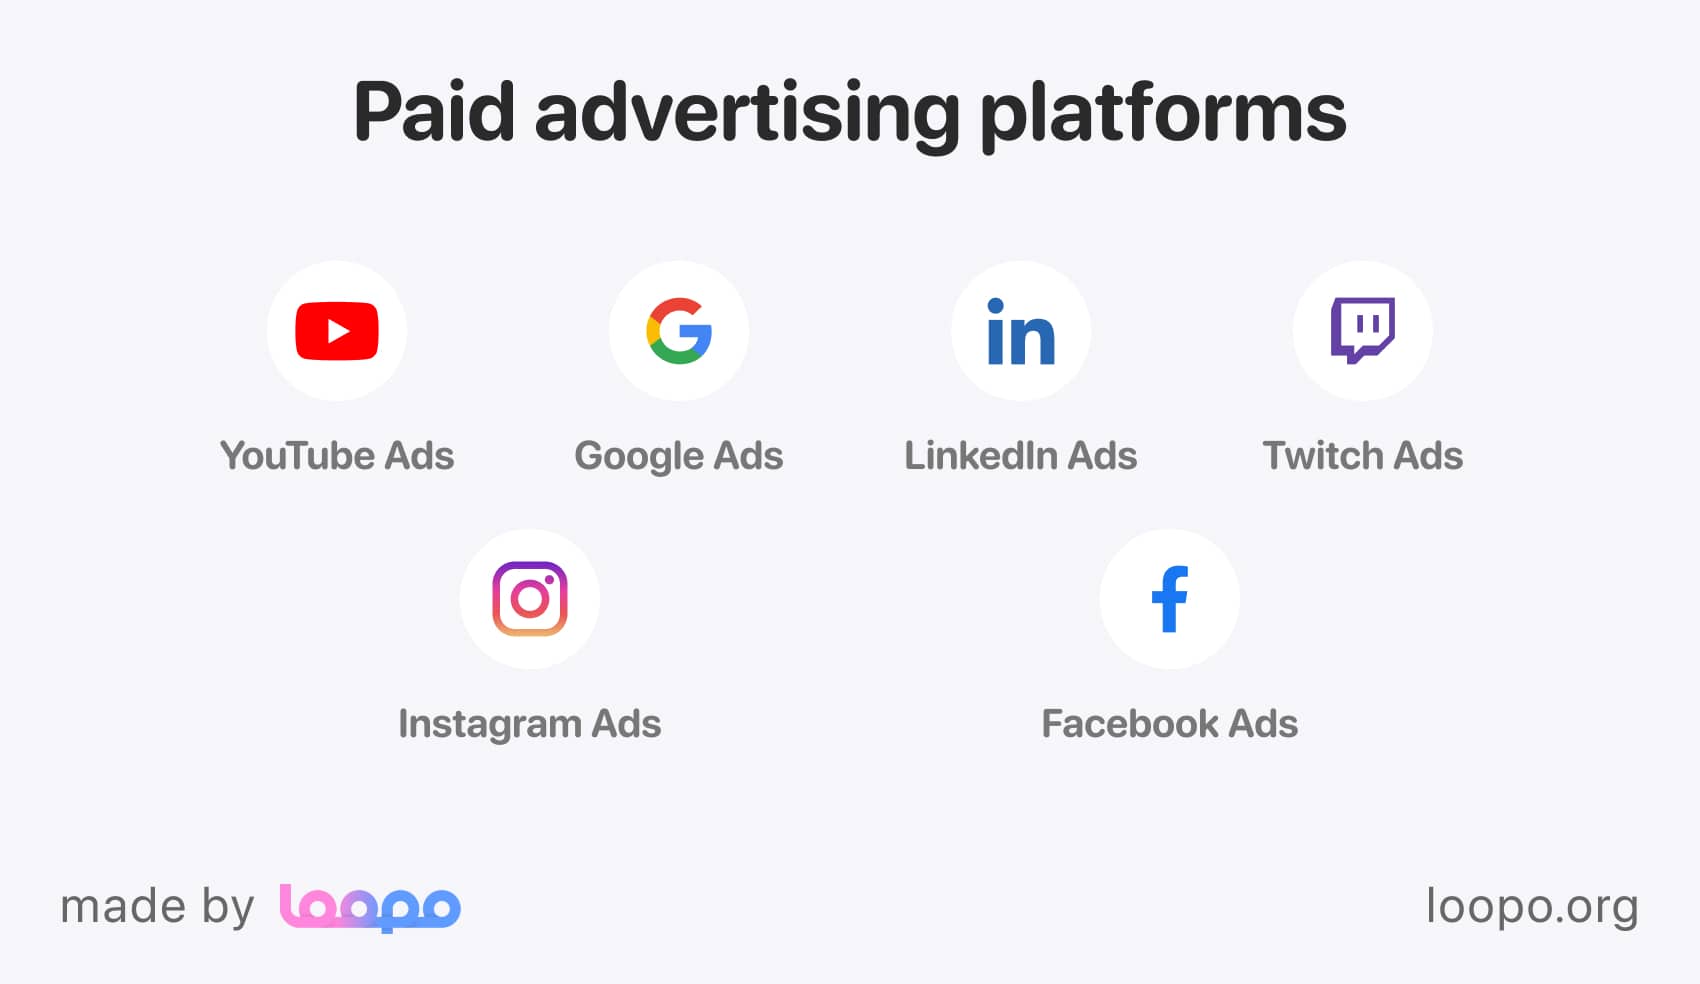 Platforms that support paid aadvertising